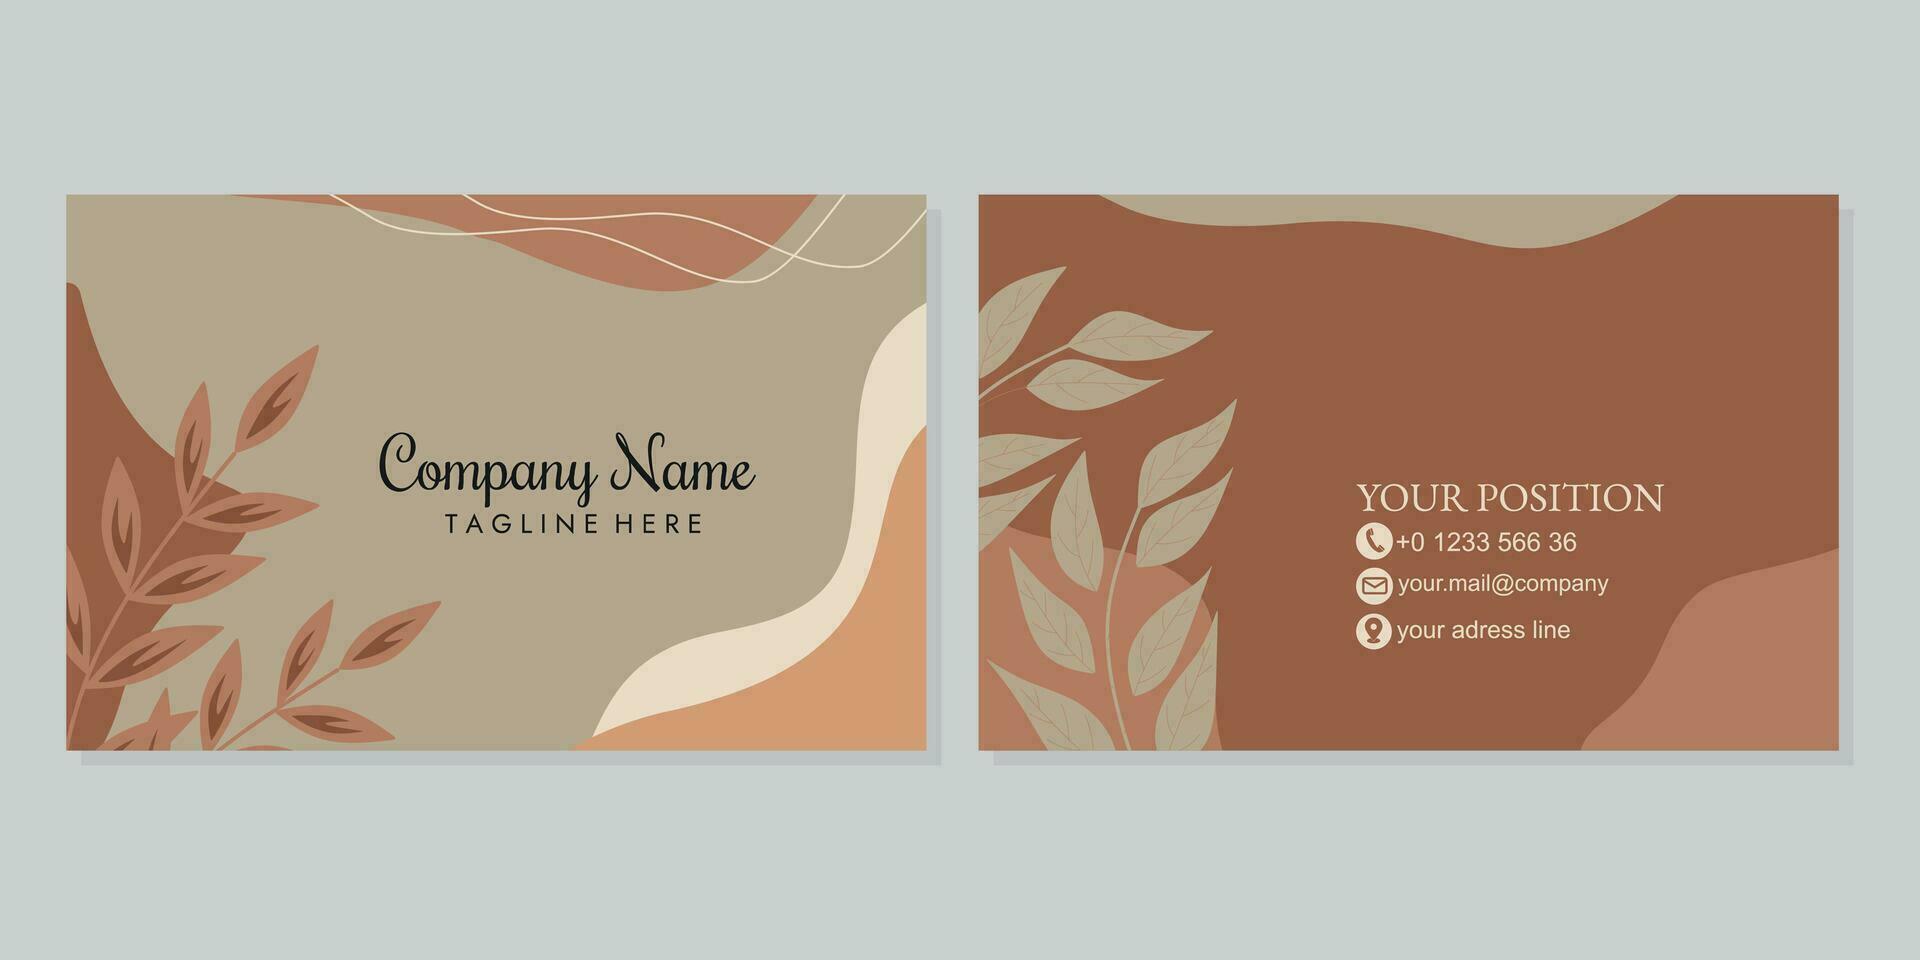 business card template with hand drawn floral pattern. landscape orientation for invite design, prestigious gift card, voucher or luxury name card vector